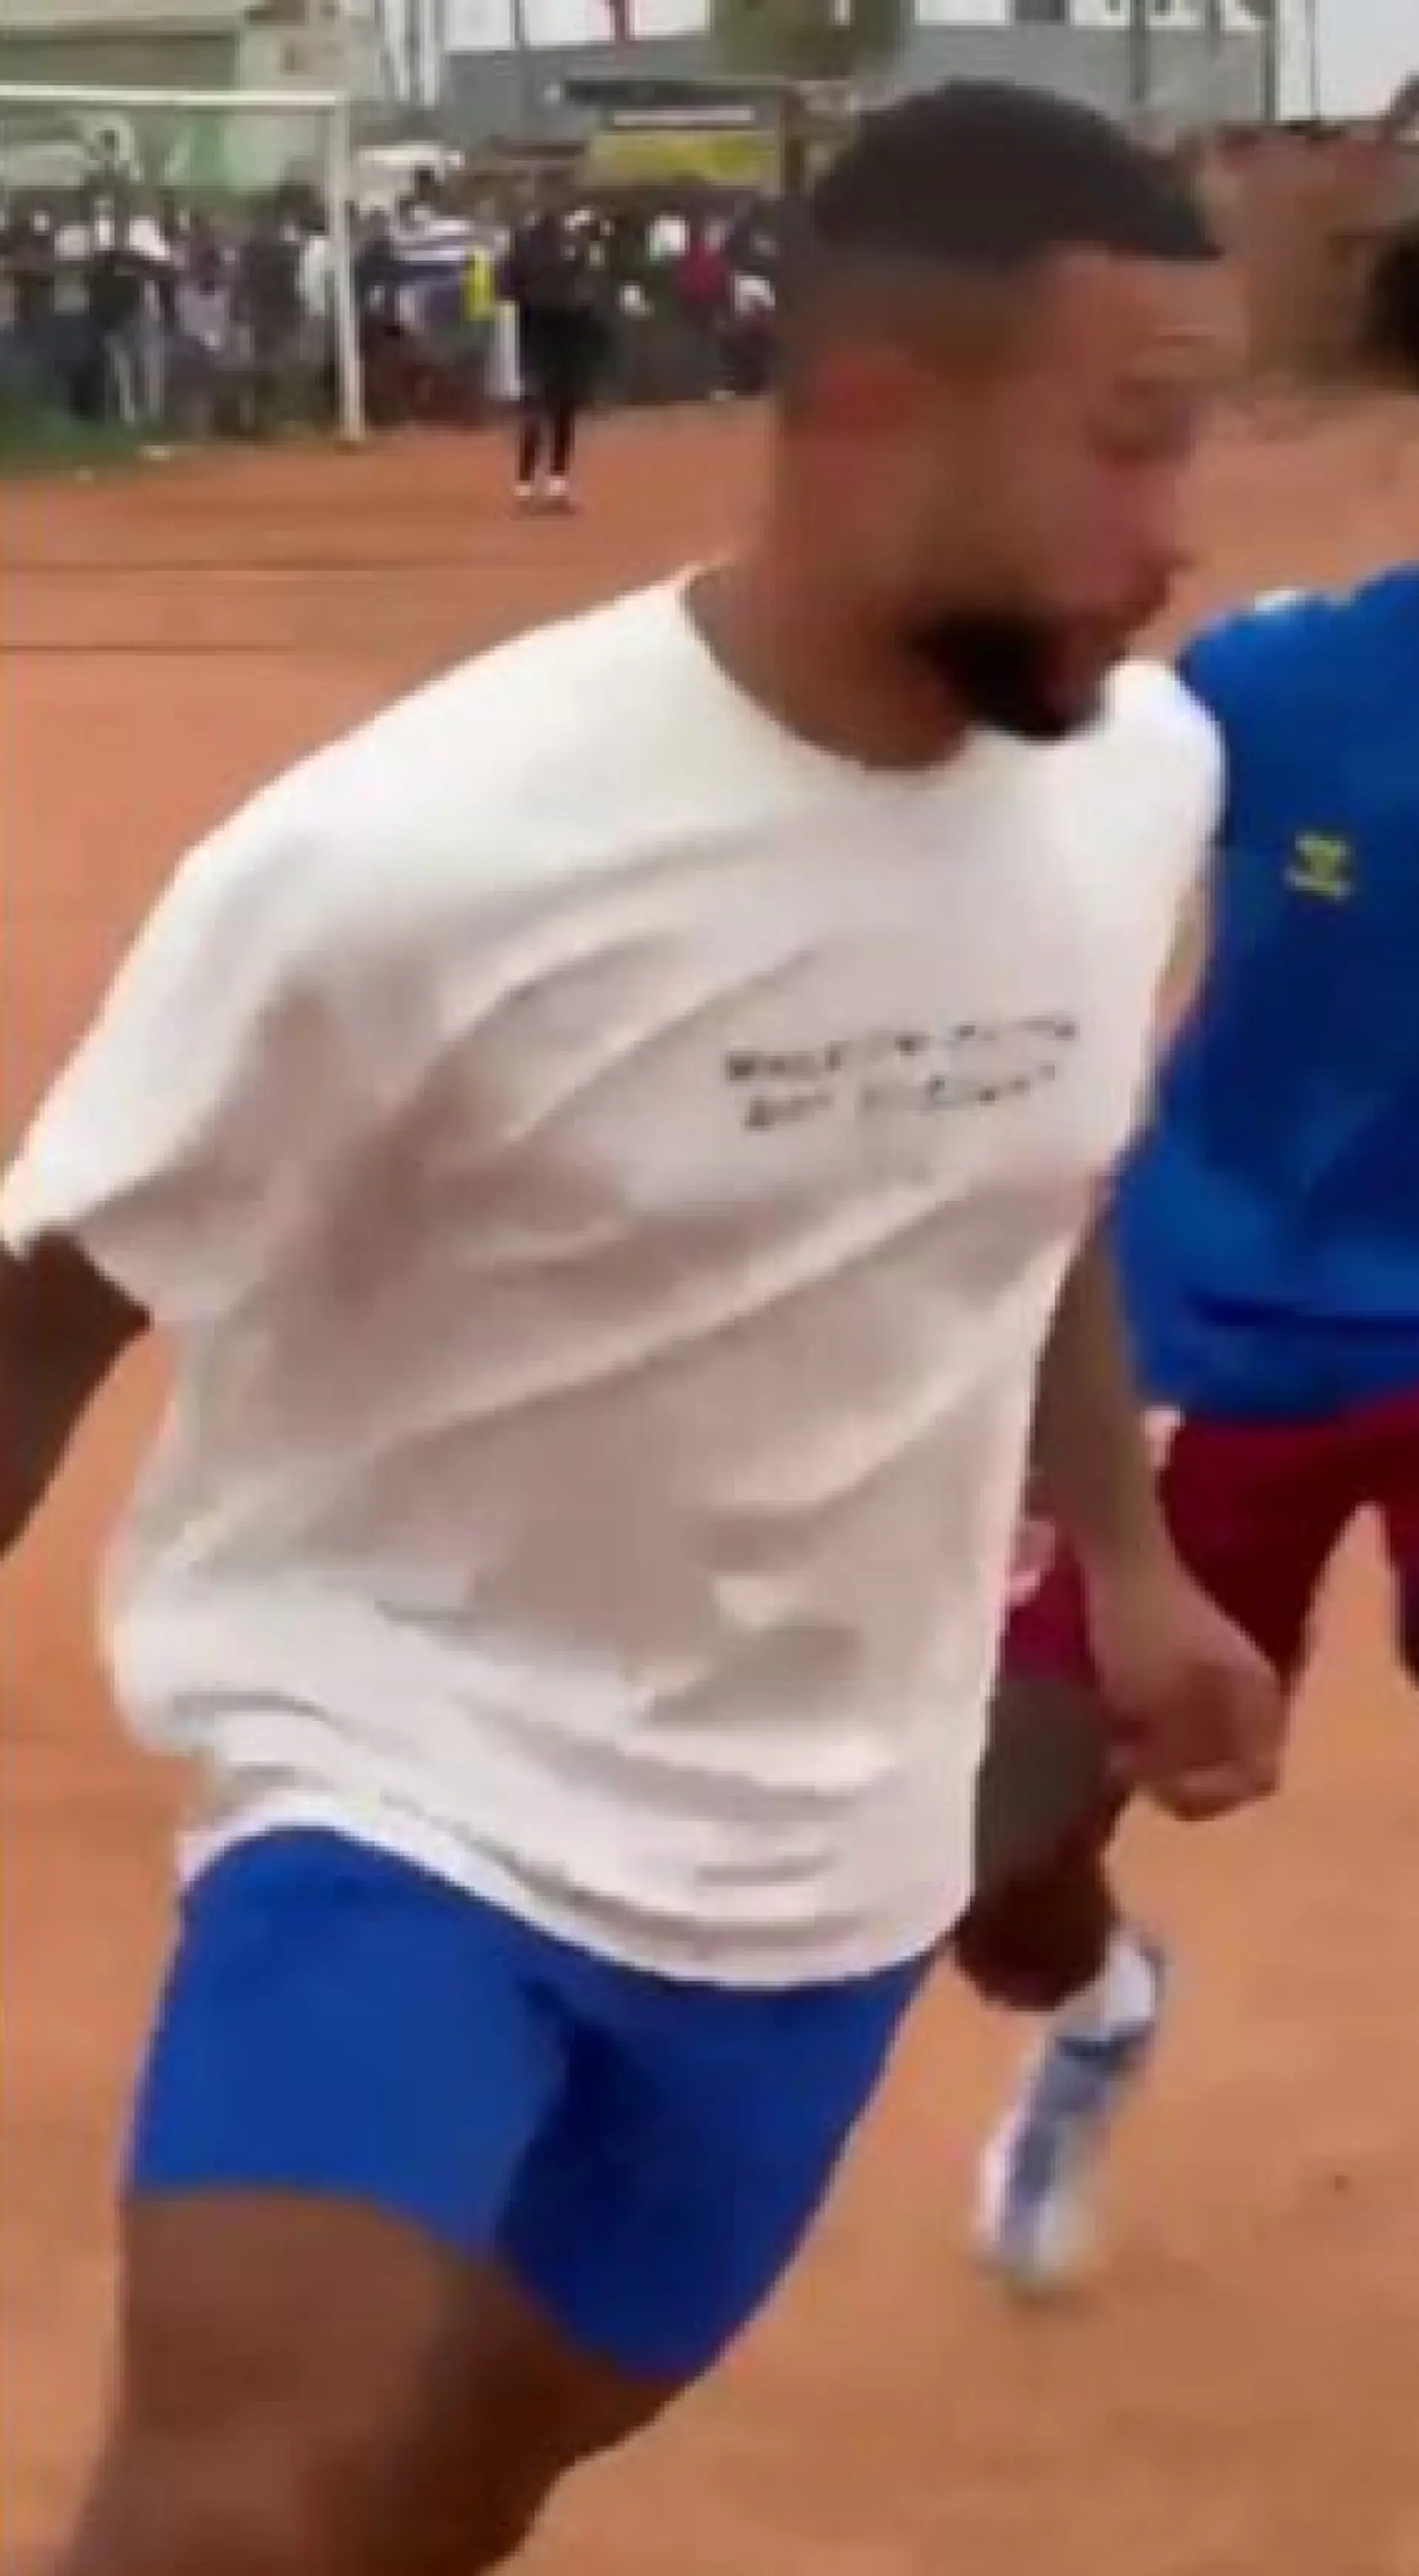 e5b5b081 4b24 499c a93f c33be2f28758?width=1920&quality=75 Memphis Depay spotted playing street football in Ghana